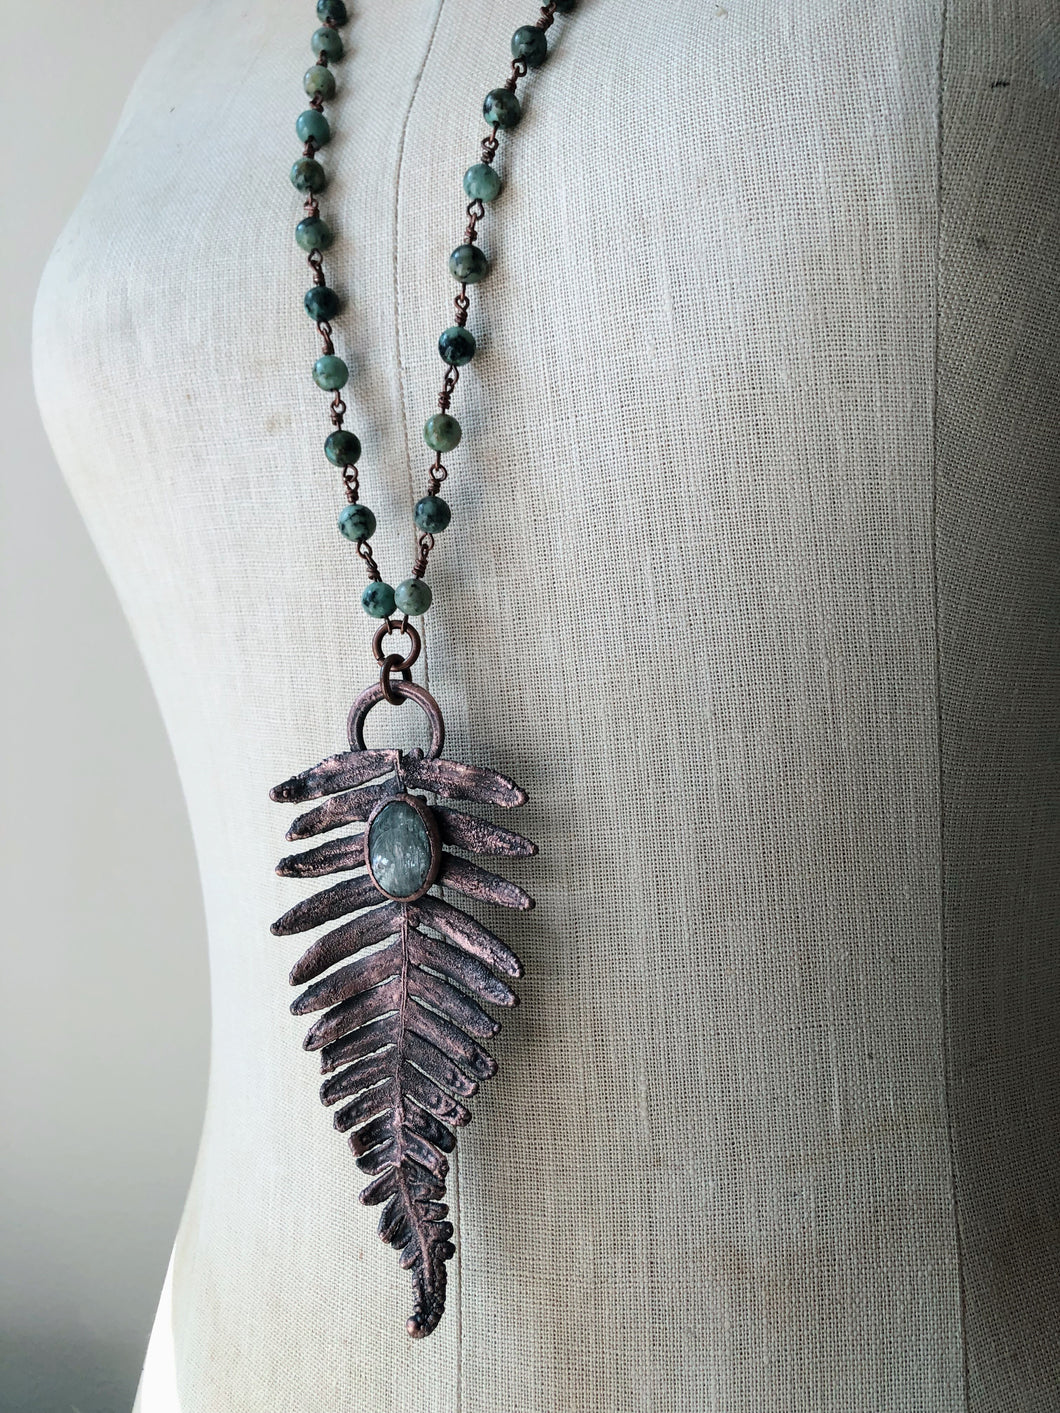 Electroformed Fern with Polished Green Kyanite Necklace #2